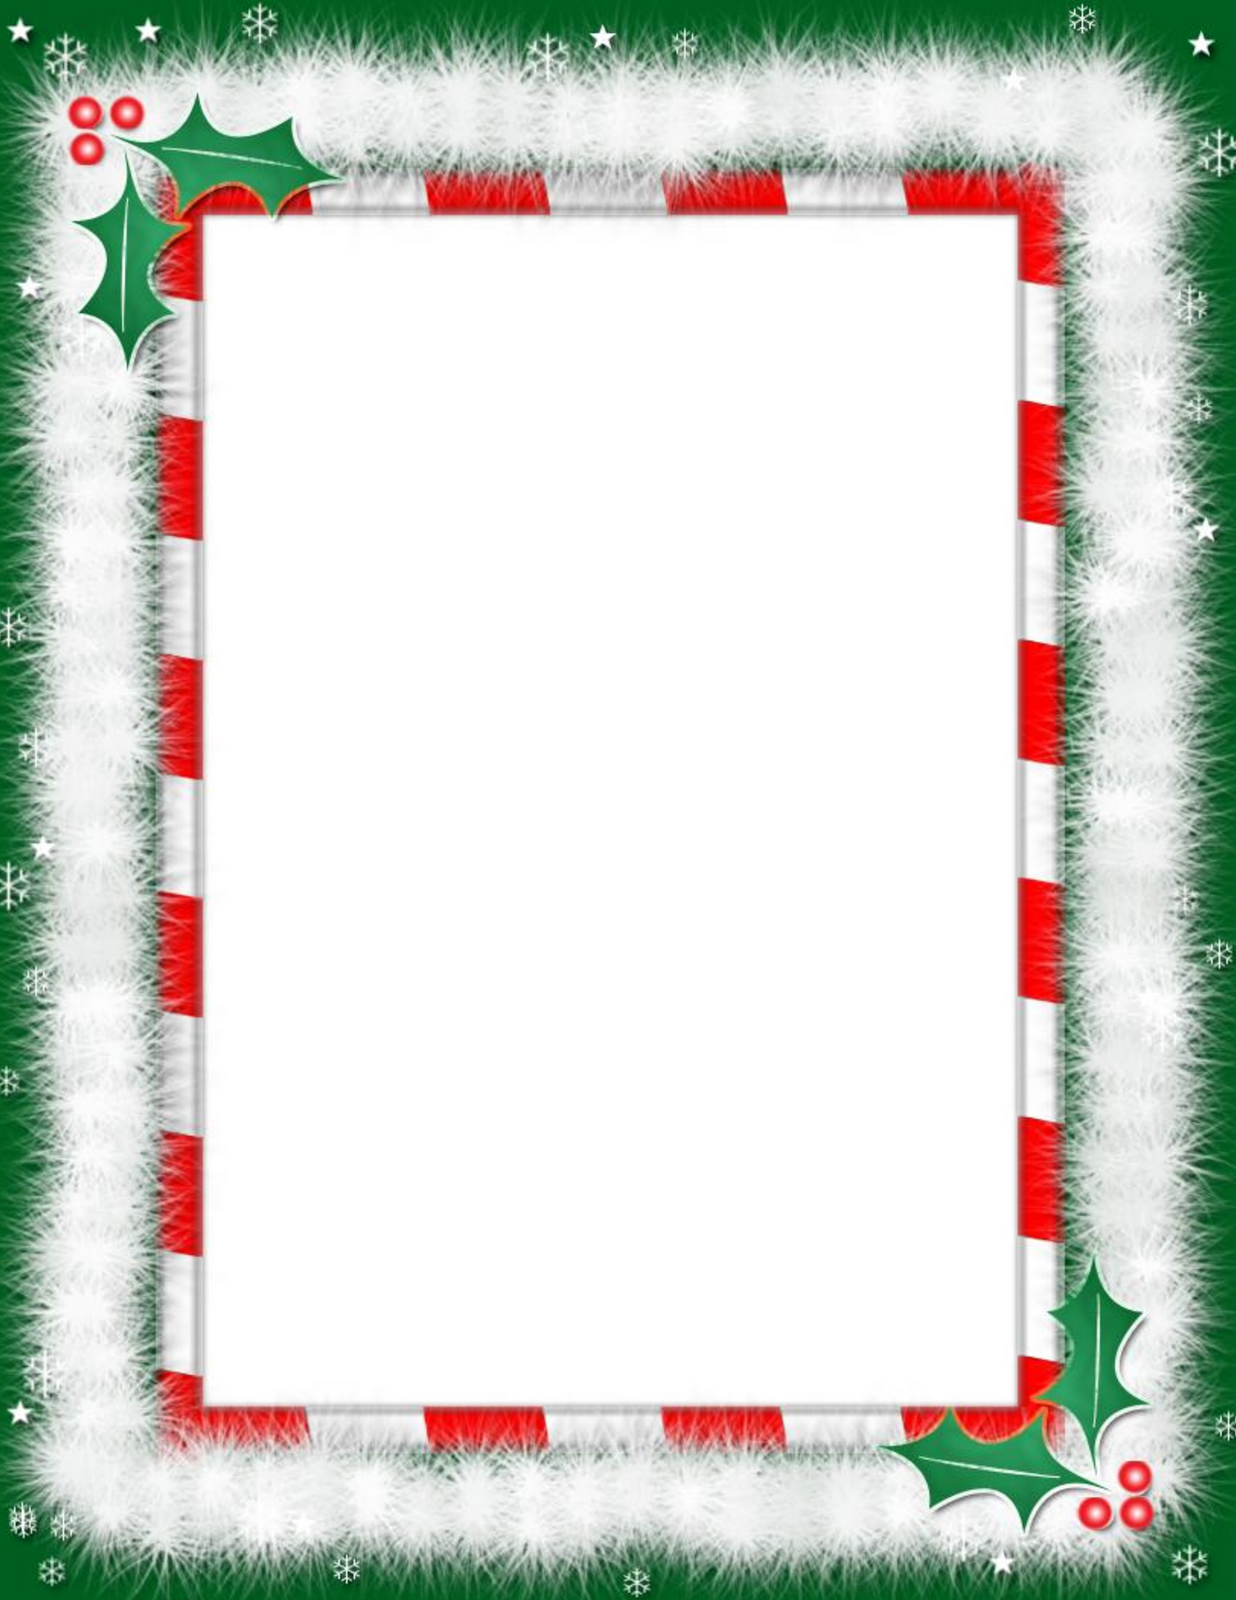 ms office christmas clipart - photo #23